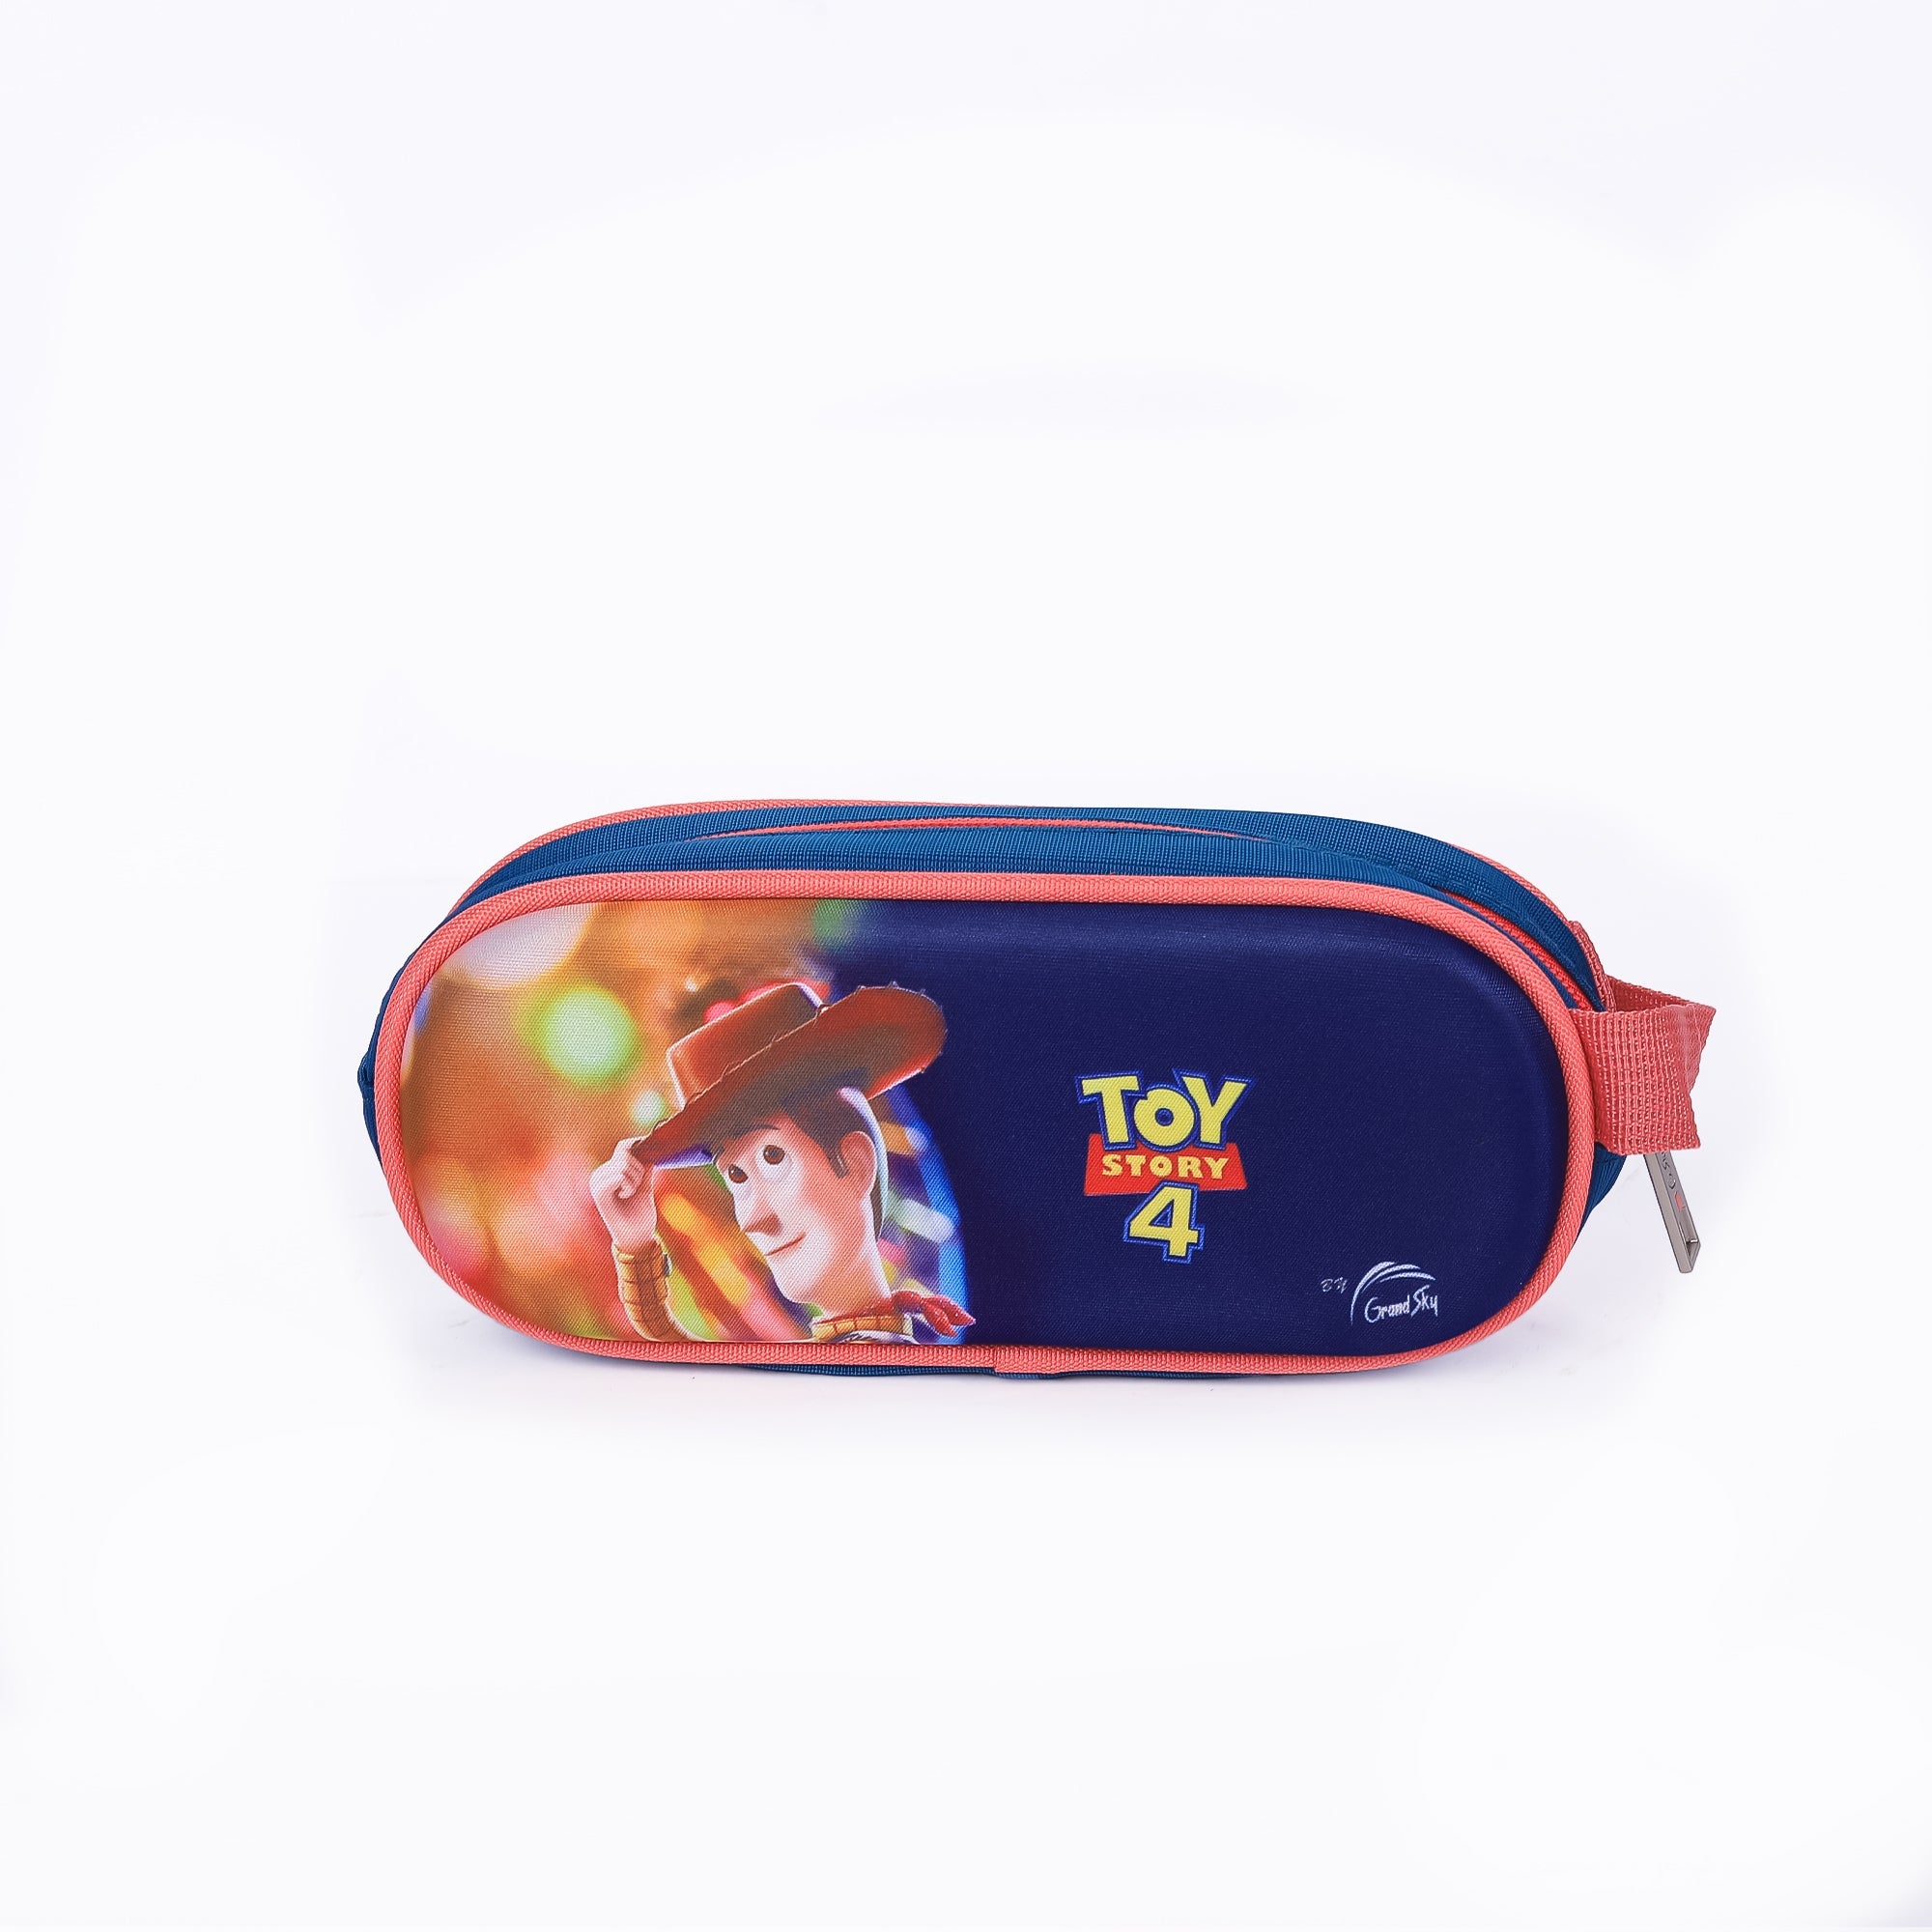 Toy Story Trolly Bag For Kids 15 INCH